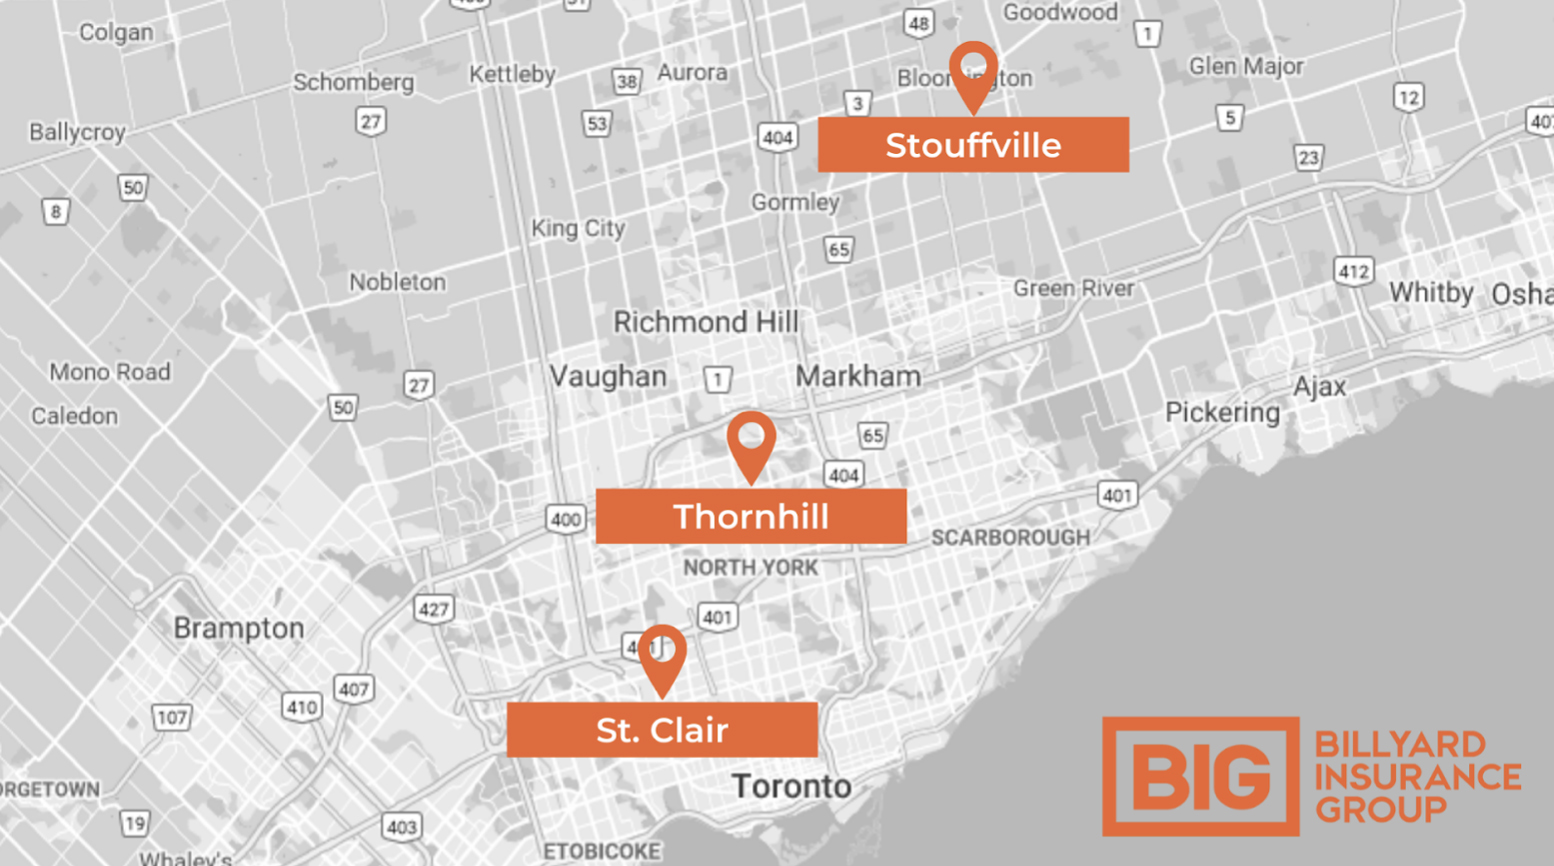 Three New Billyard Insurance Group Locations Now Open in the GTA